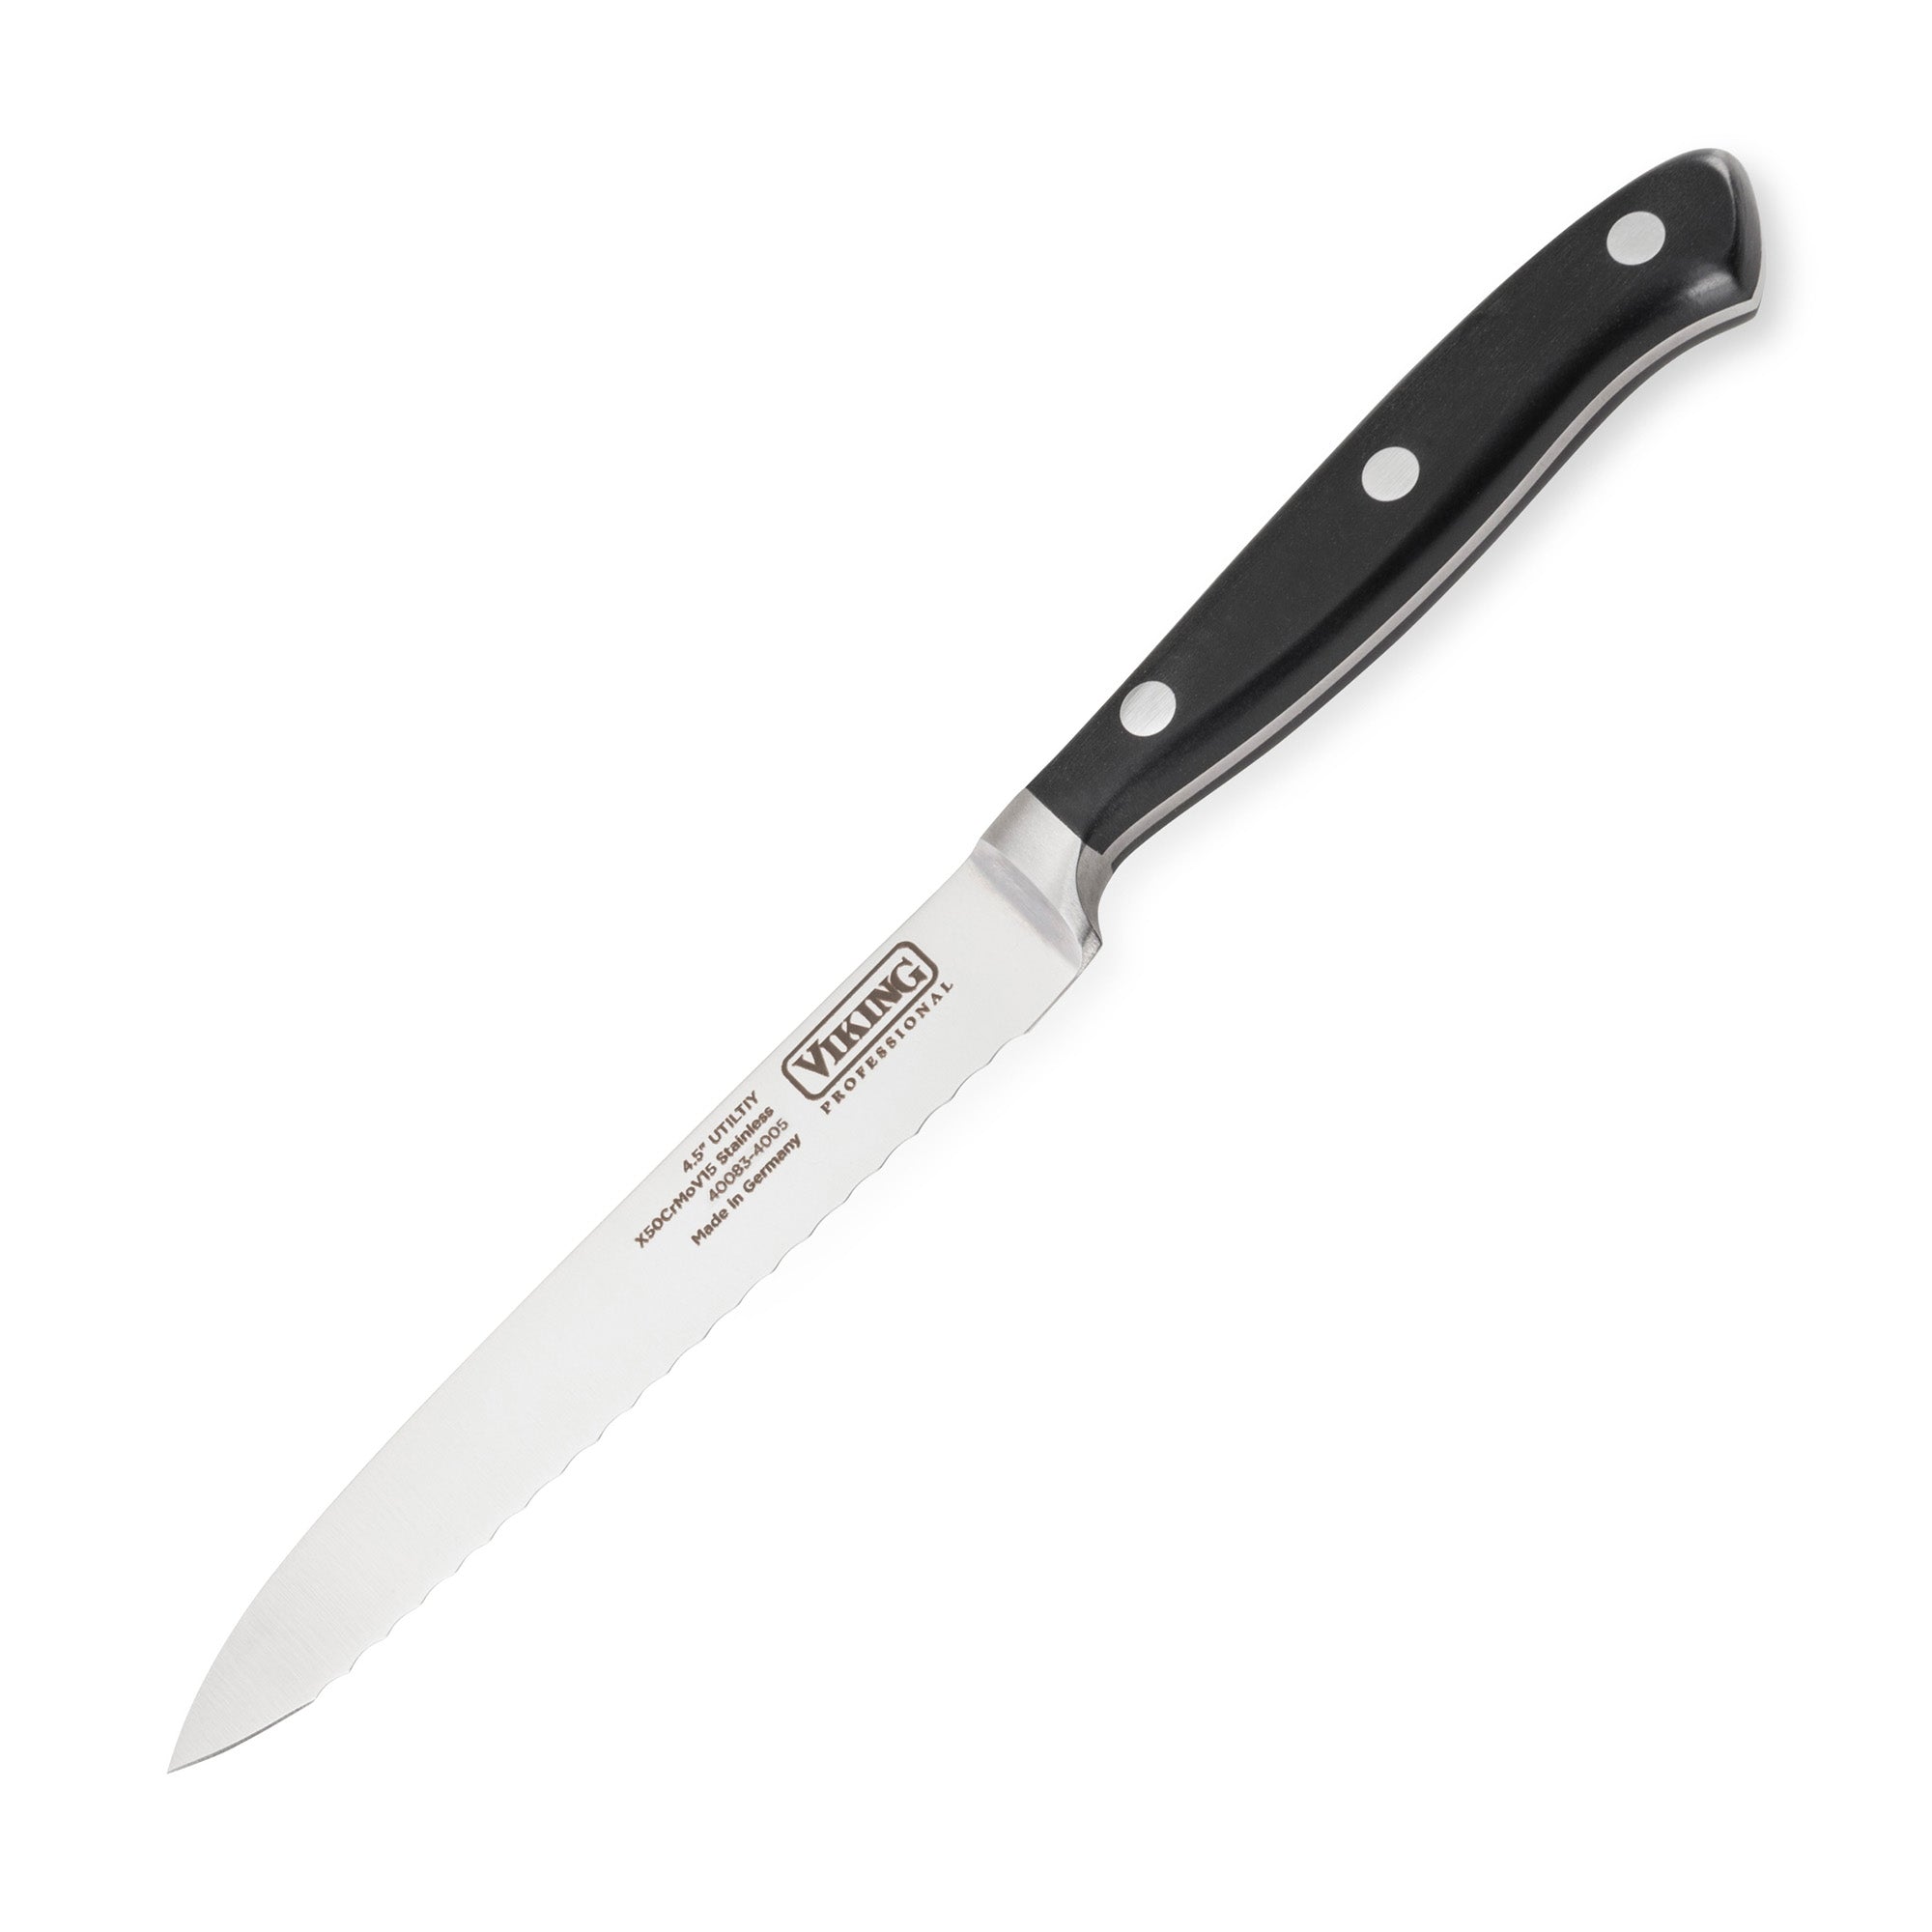 Buy an All-Purpose Kitchen Utility Knife Made from German Steel